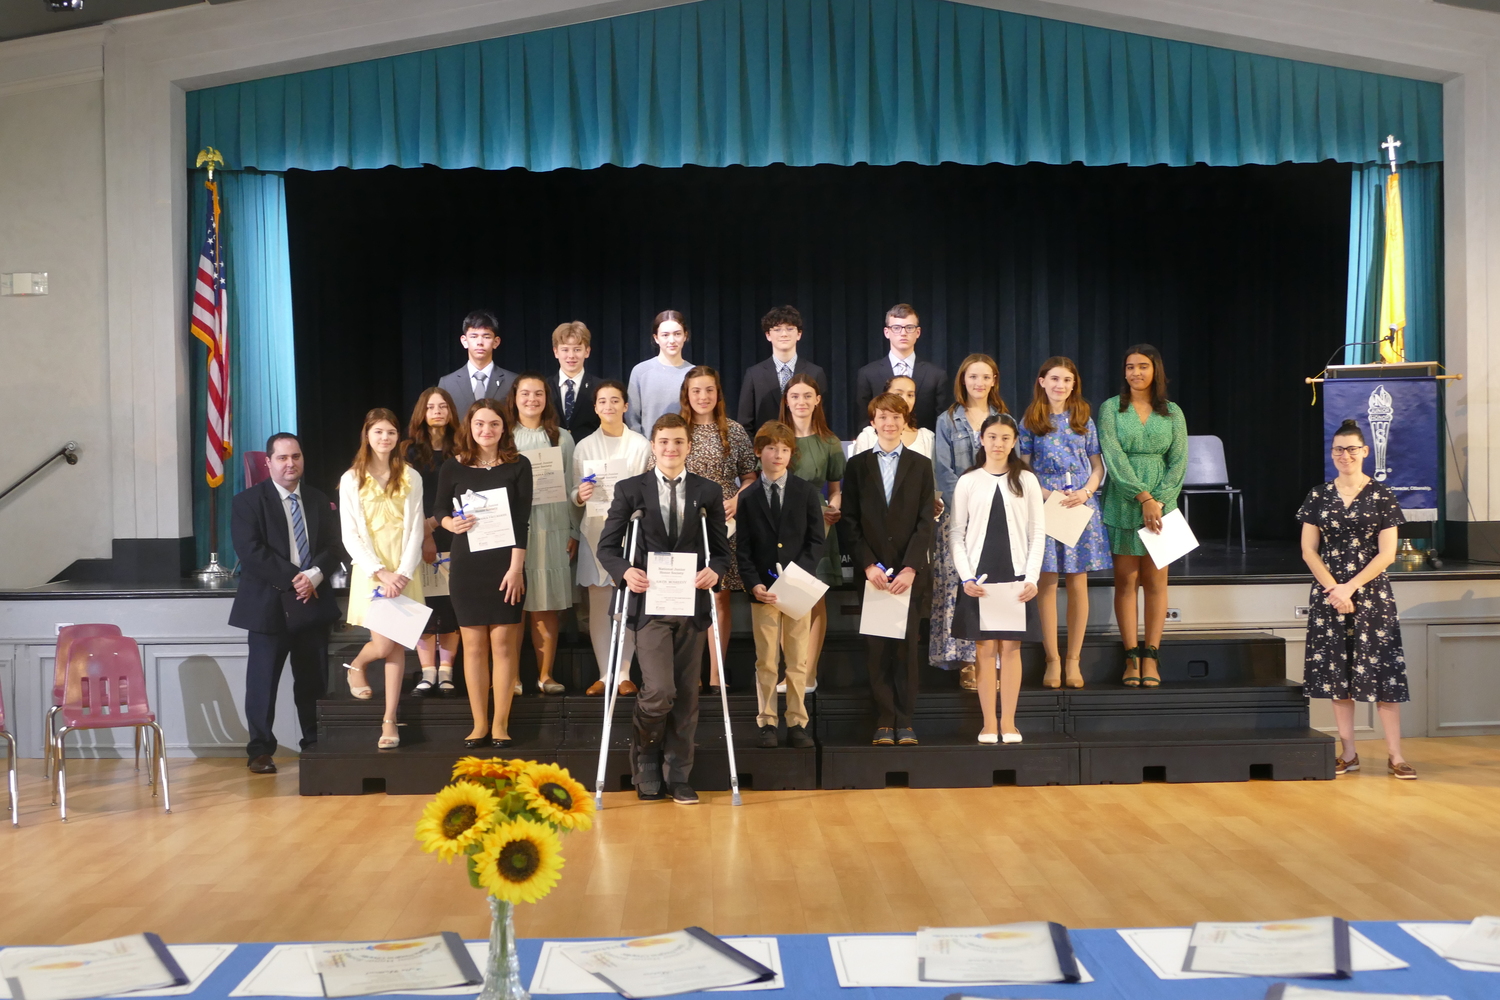 Our Lady of the Hamptons School recently inducted new members into the National Junior Honor Society. COURTESY OUR LADY OF THE HAMPTONS SCHOOL